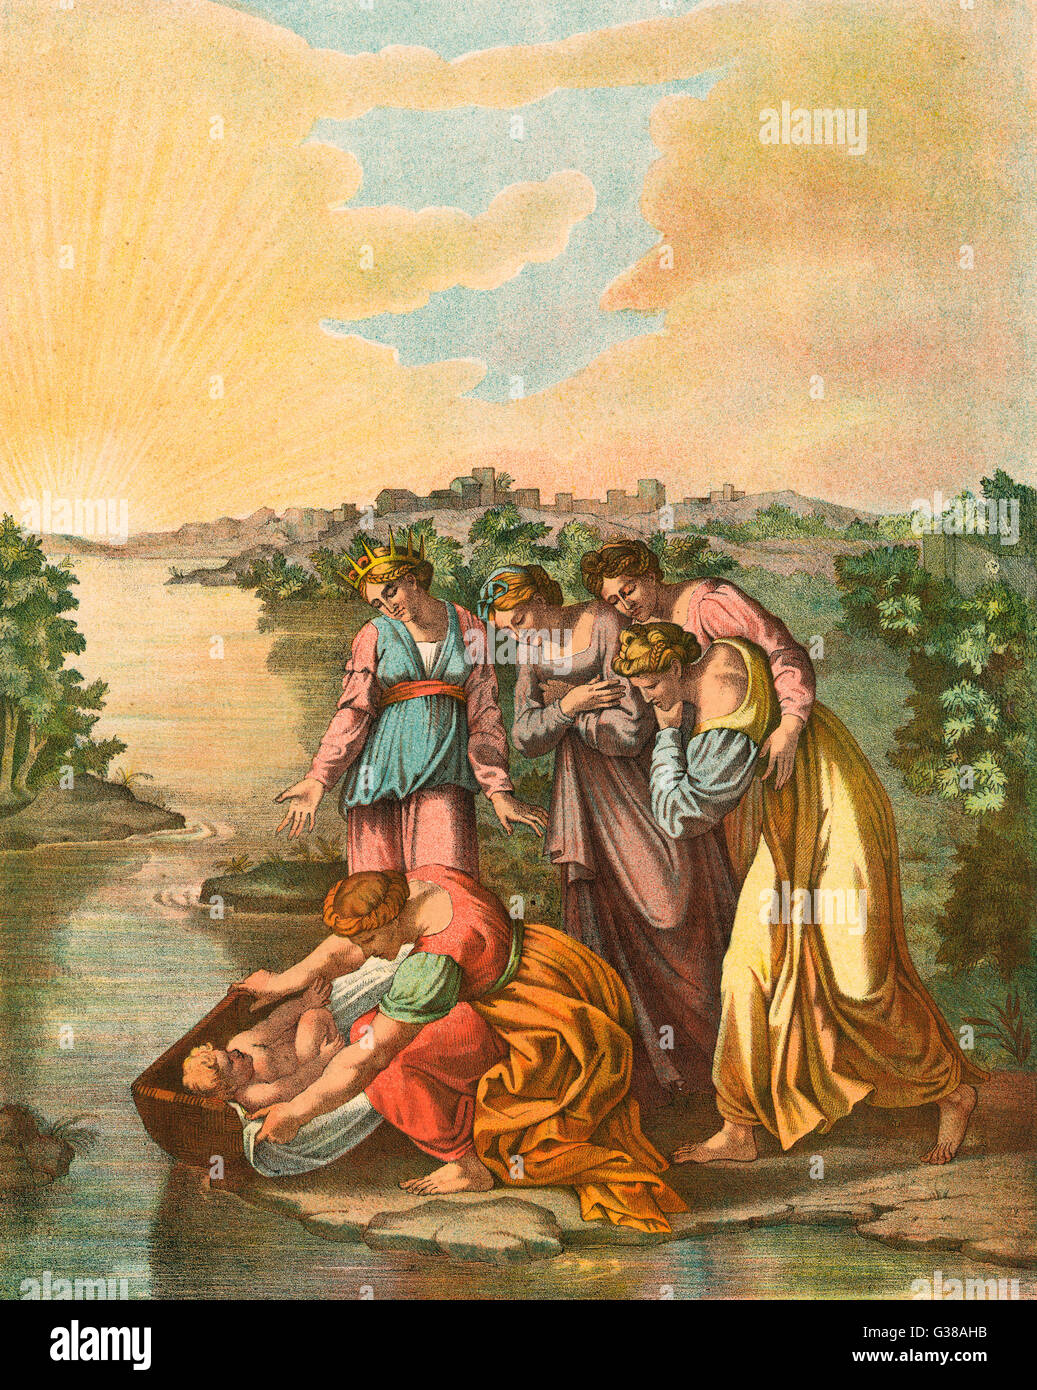 MOSES FOUND IN THE NILE Stock Photo